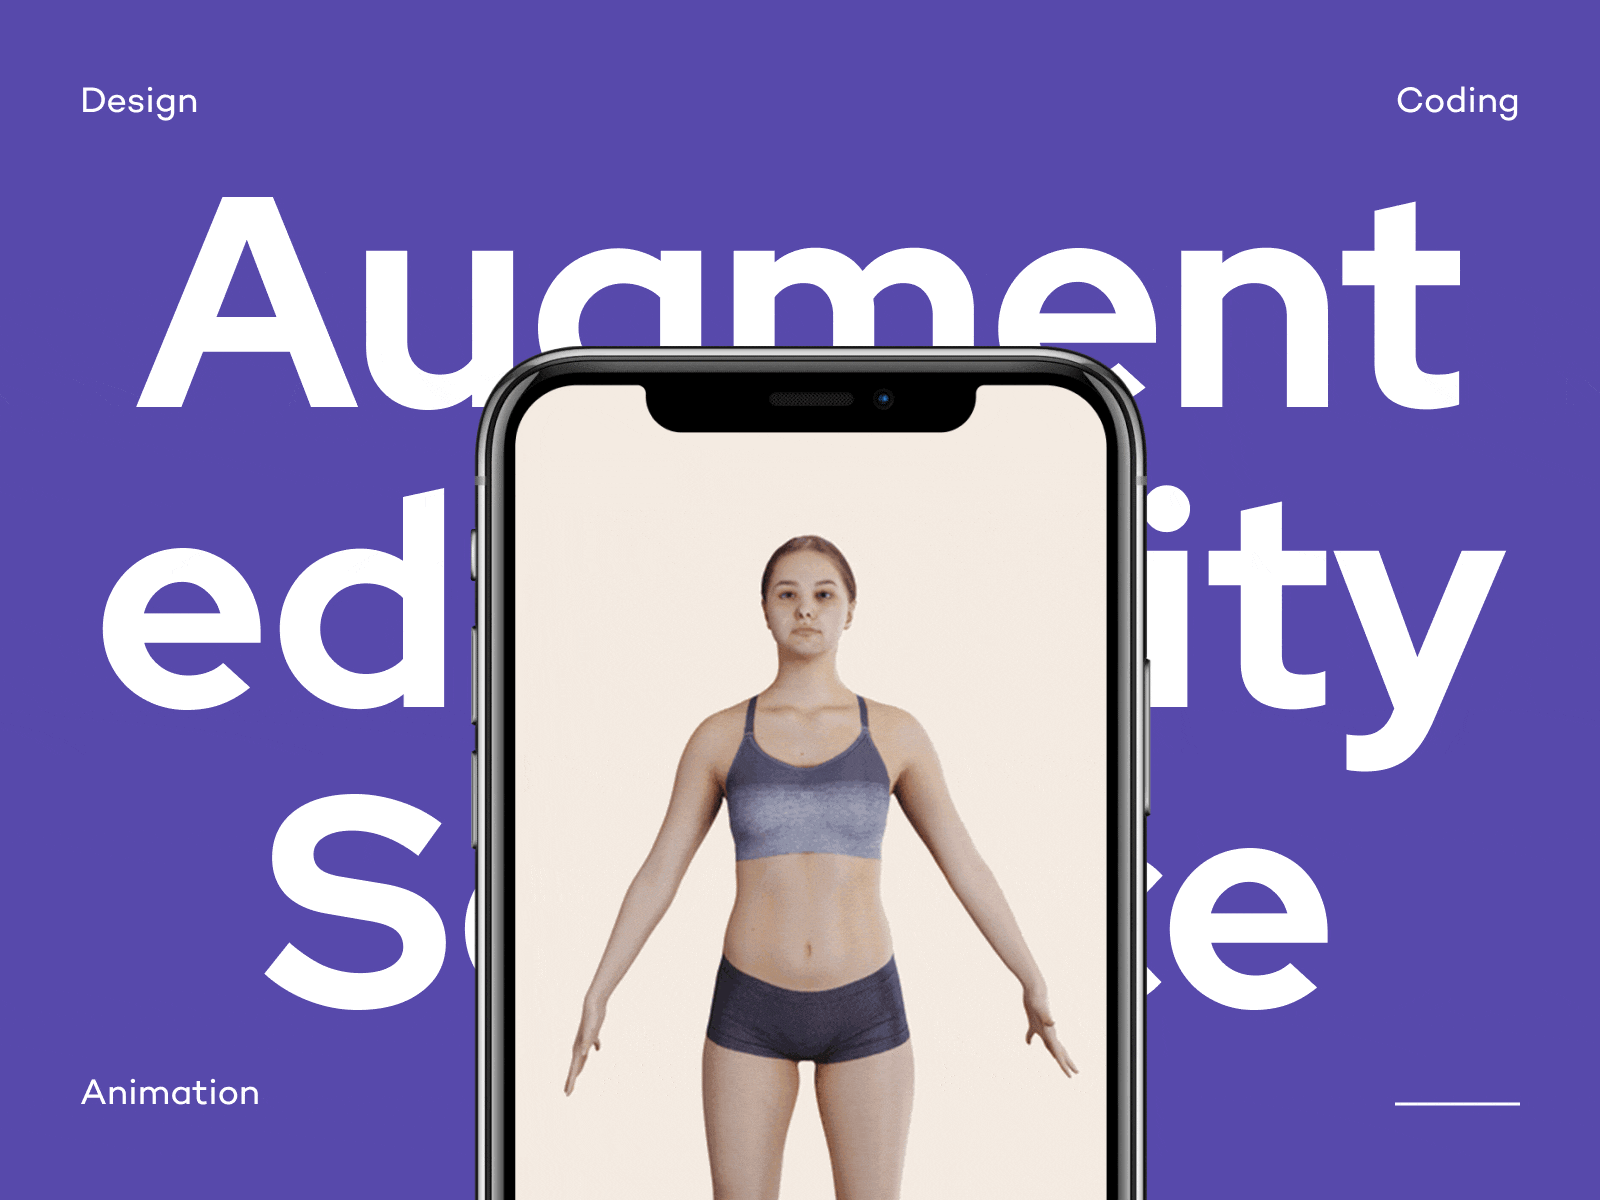 Augmented Reality Service